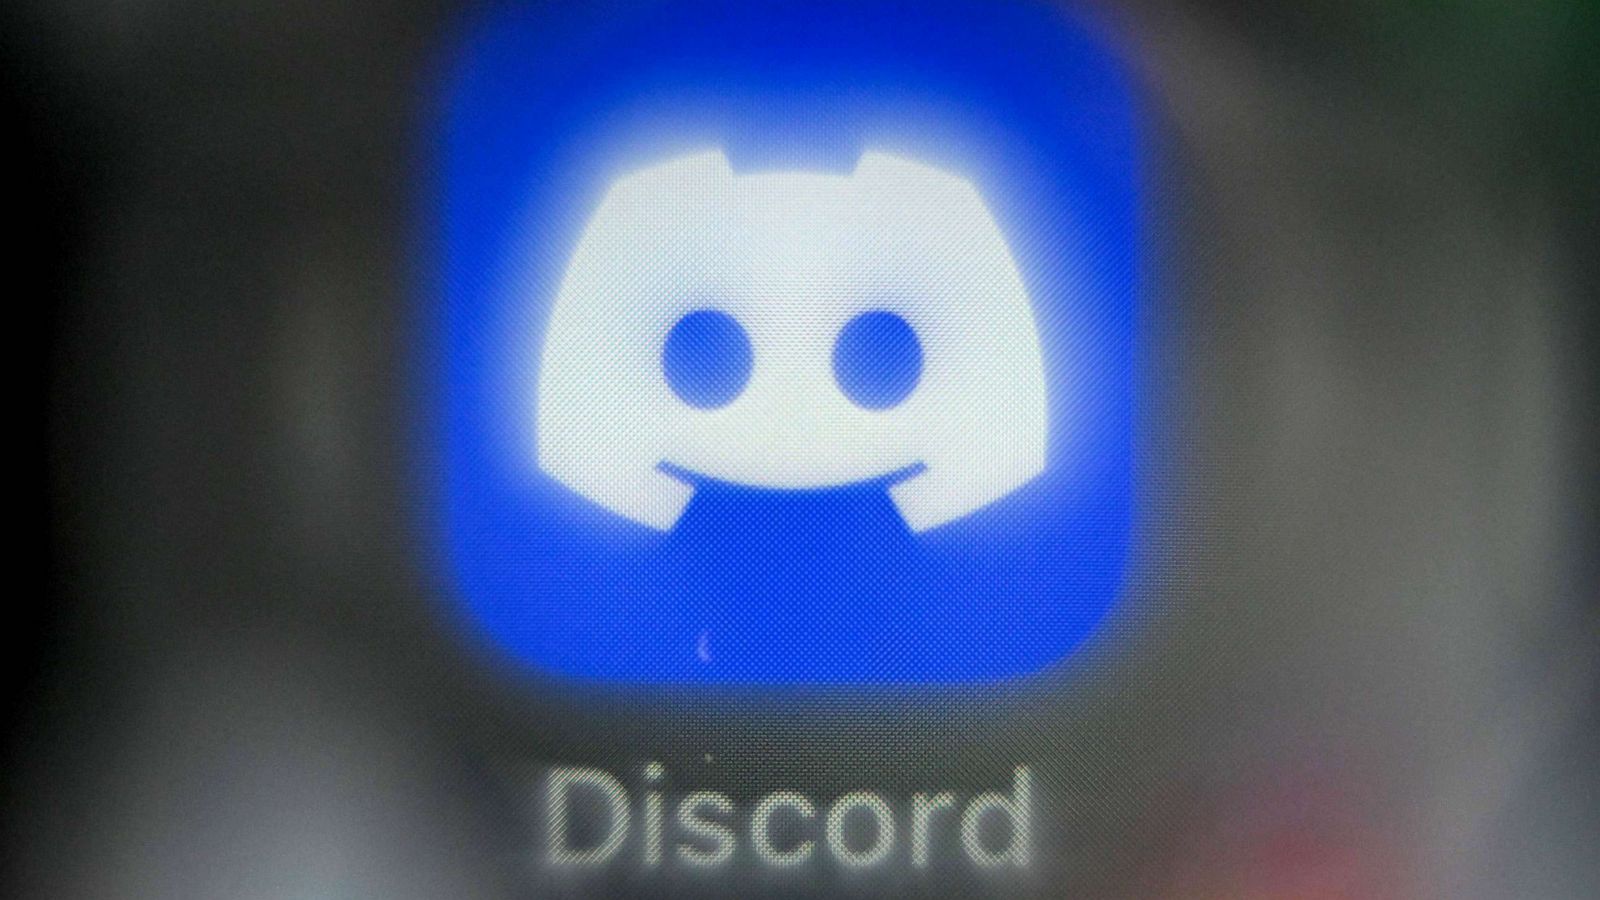 Discord member details how documents leaked from closed chat group